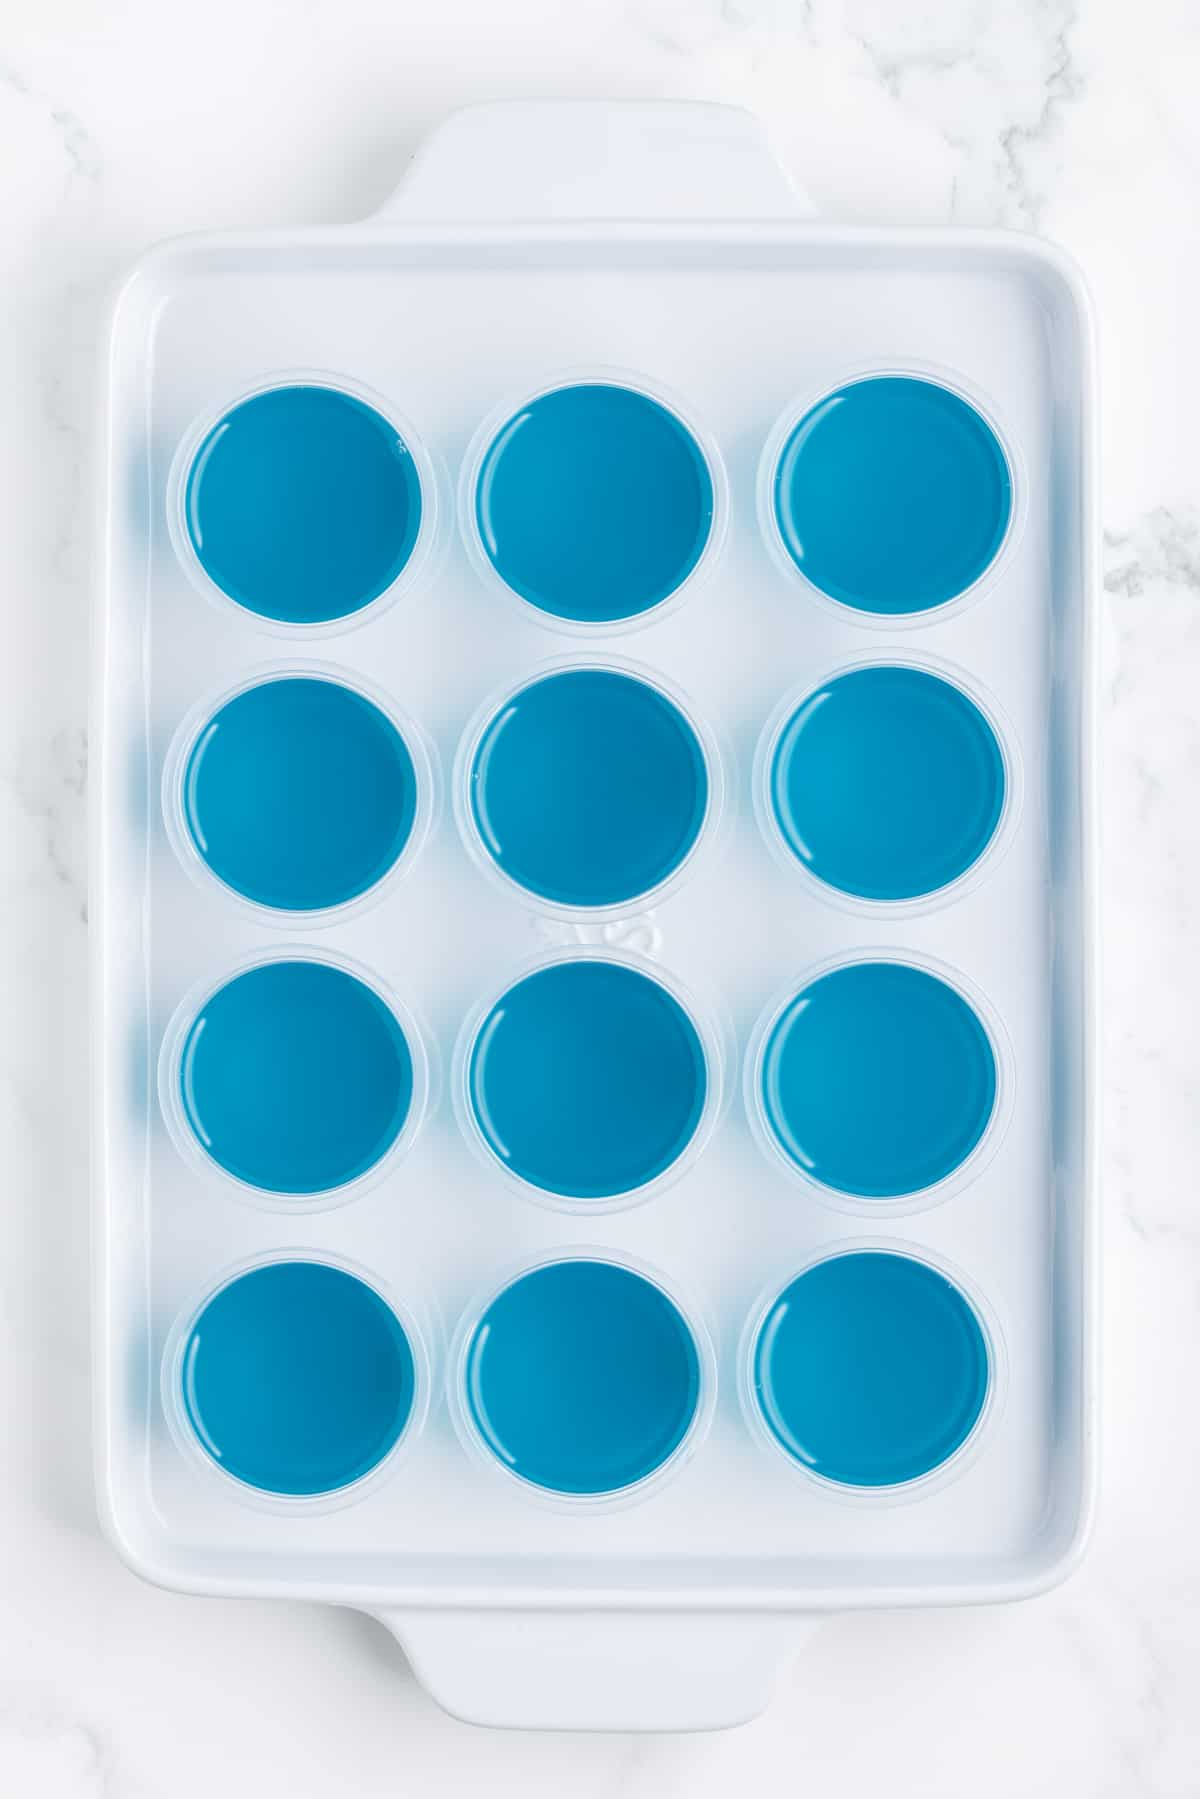 Blue jello shots ready to be chilled.